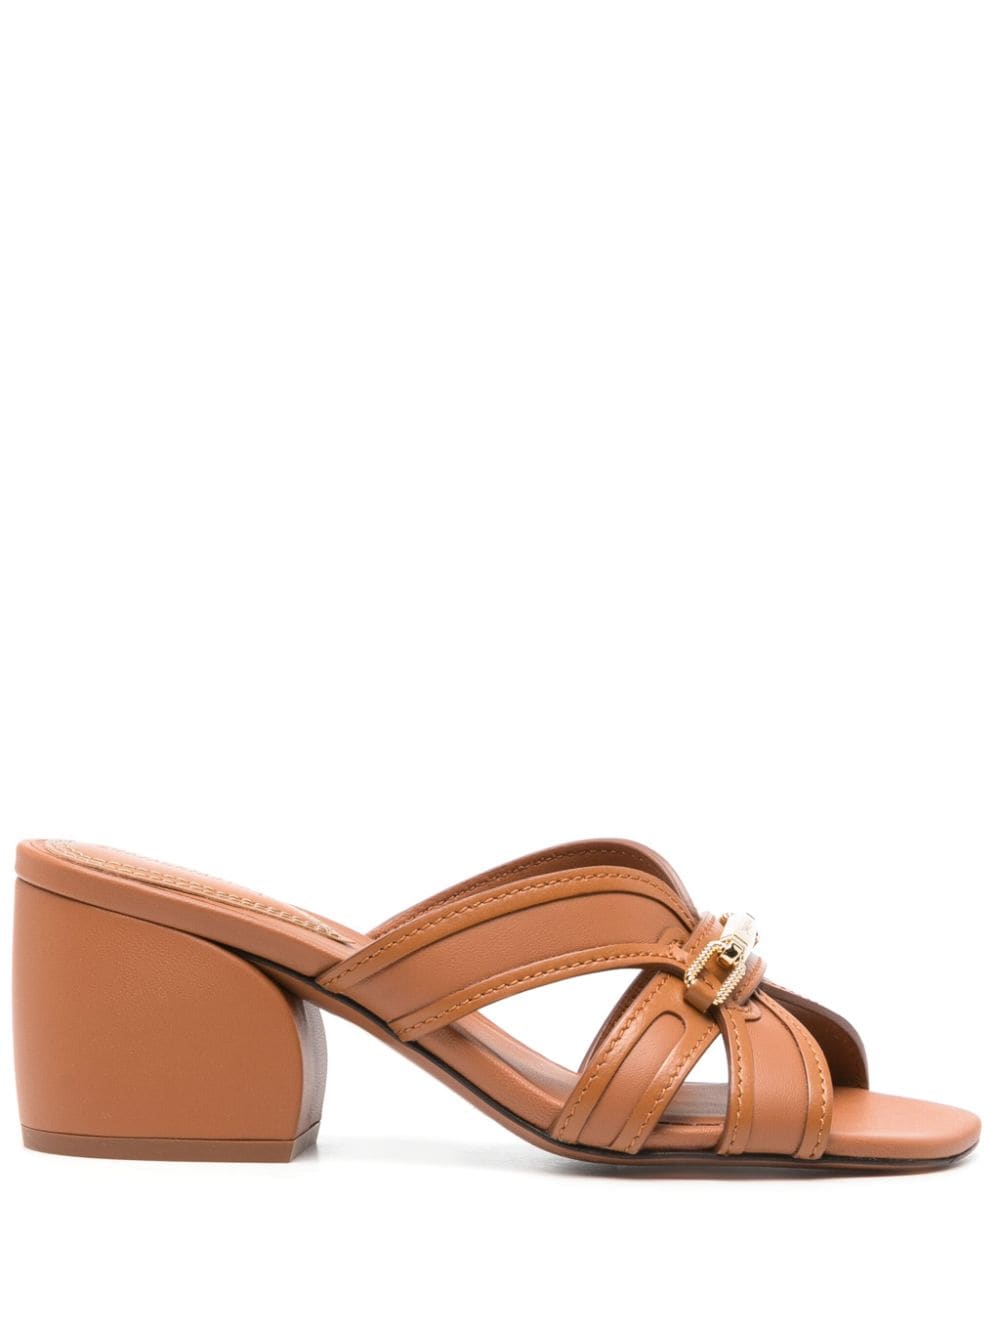 Image 1 of ZIMMERMANN Prisma 65mm leather sandals